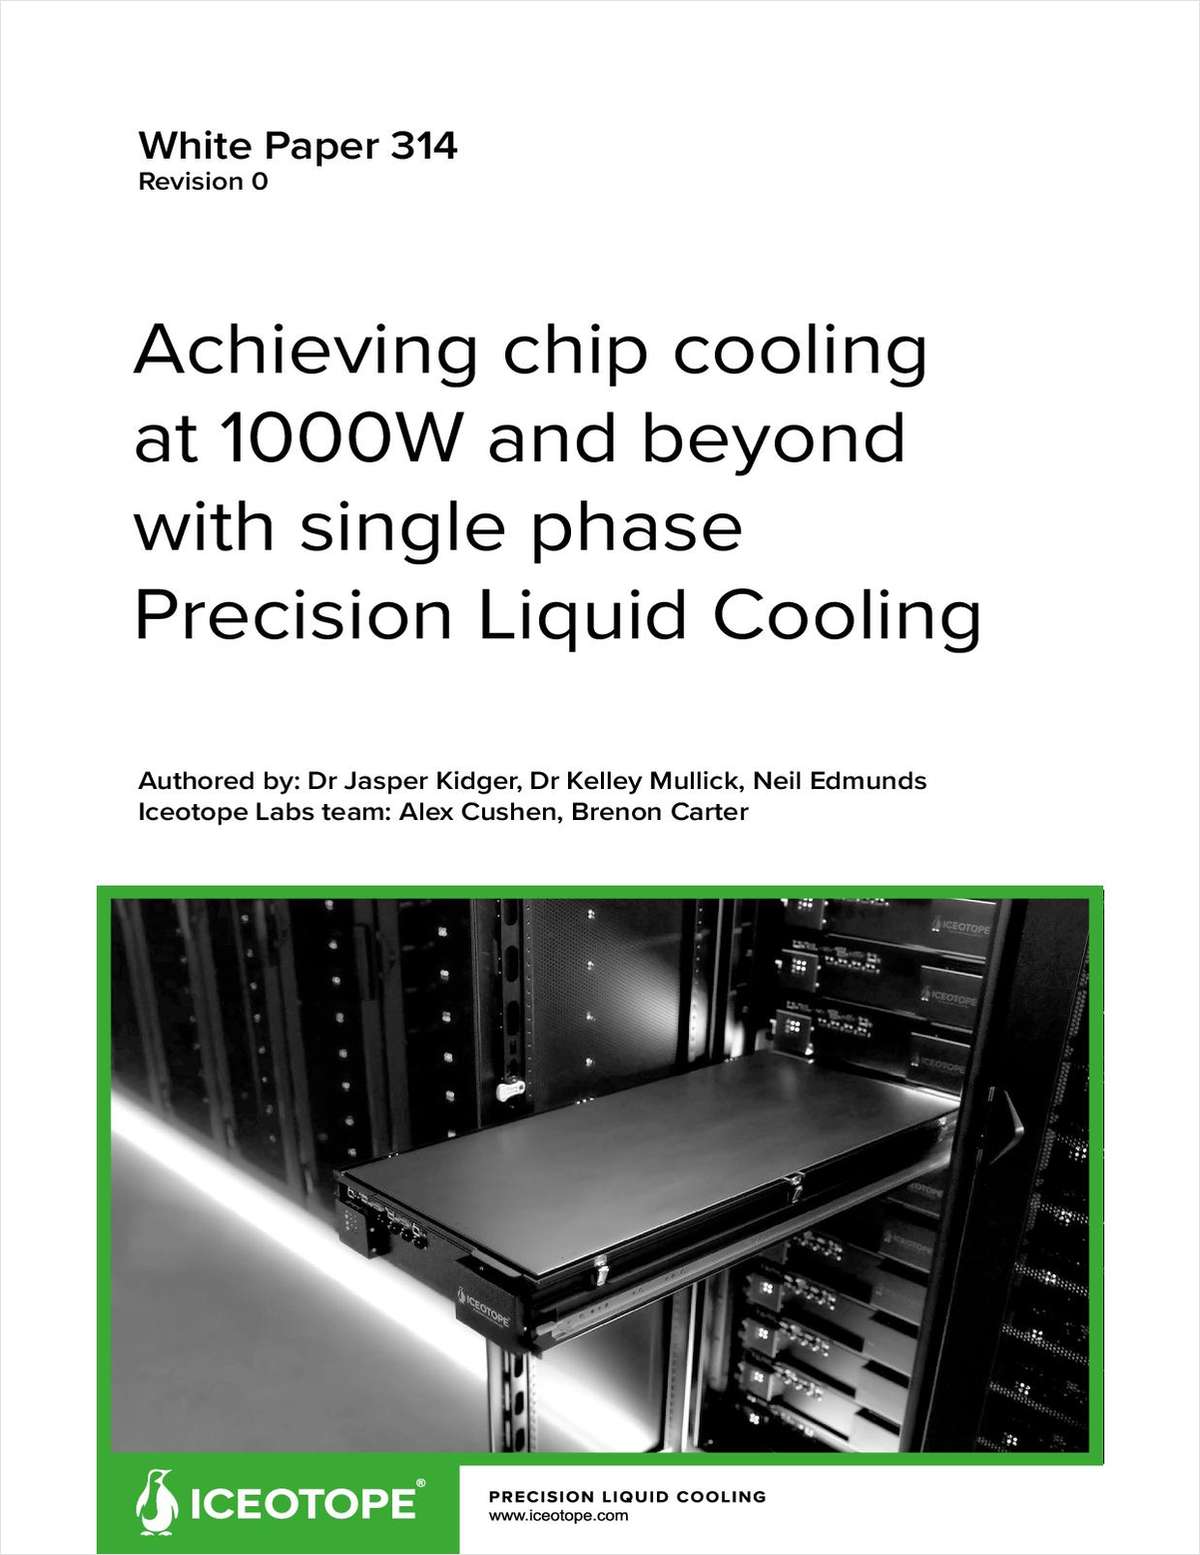 Achieving Chip Cooling at 1000W and Beyond with Single Phase Precision Liquid Cooling